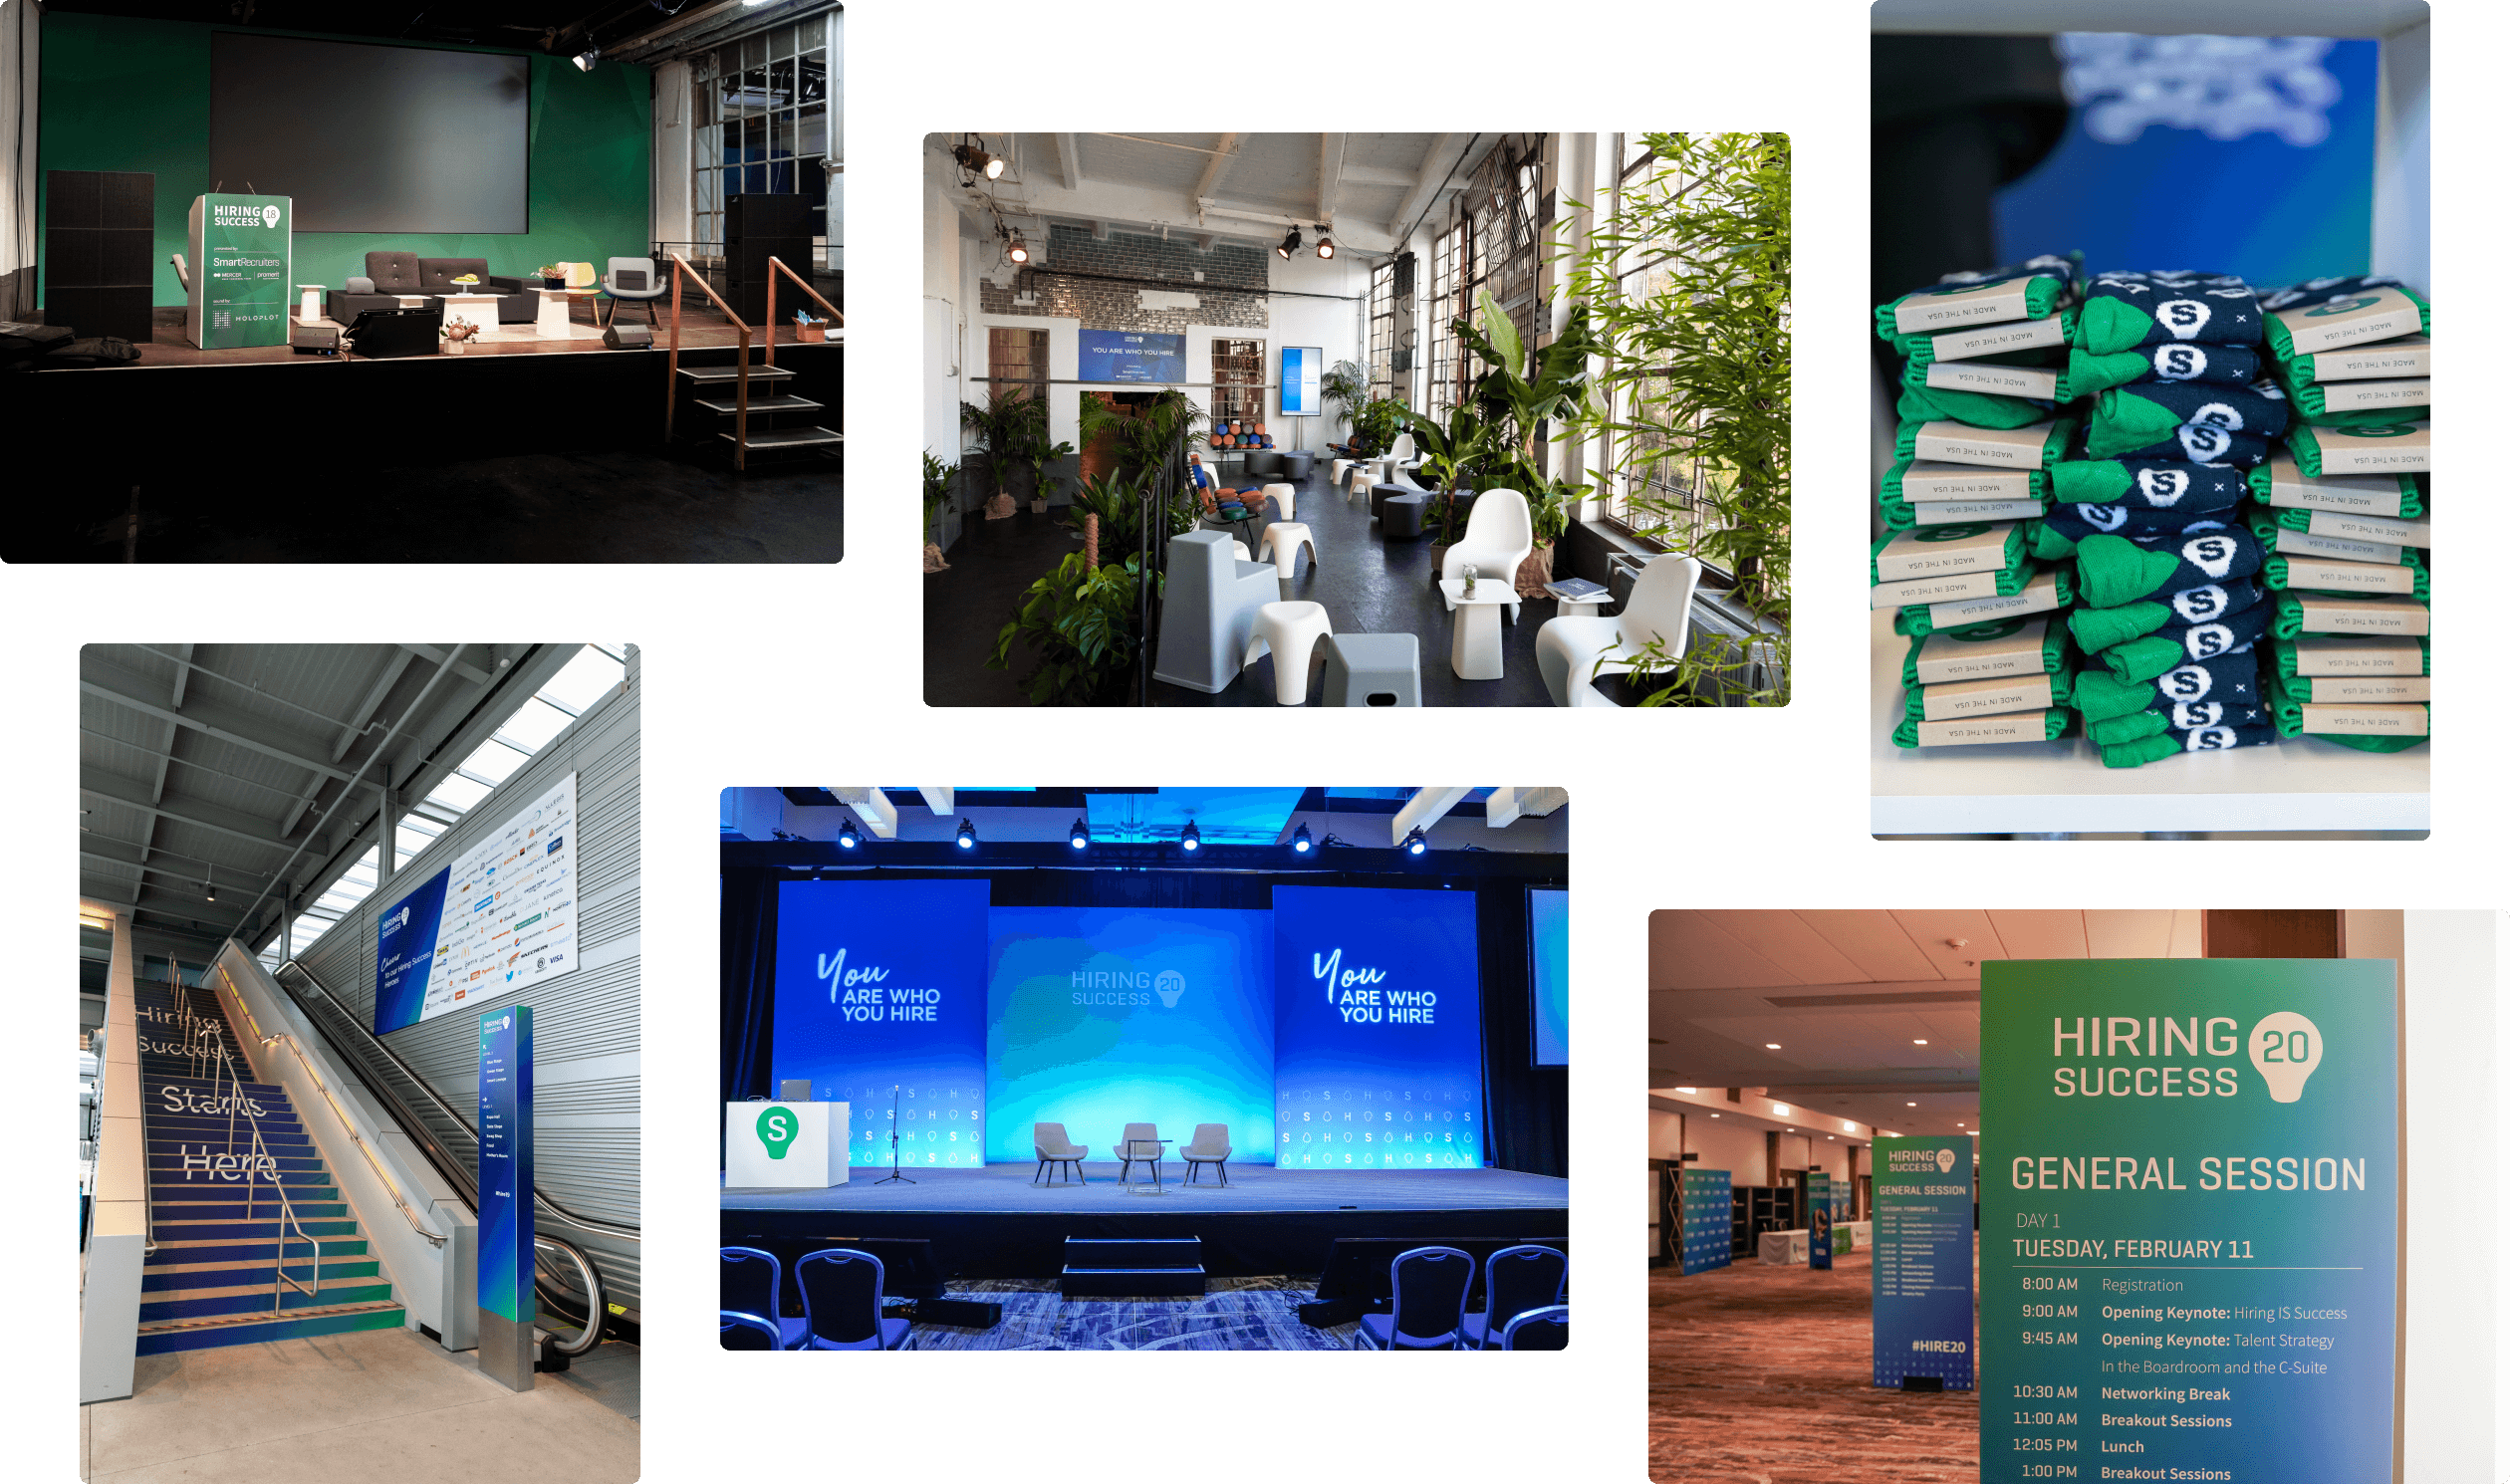 Venues pictures from different events that showcase the events branding